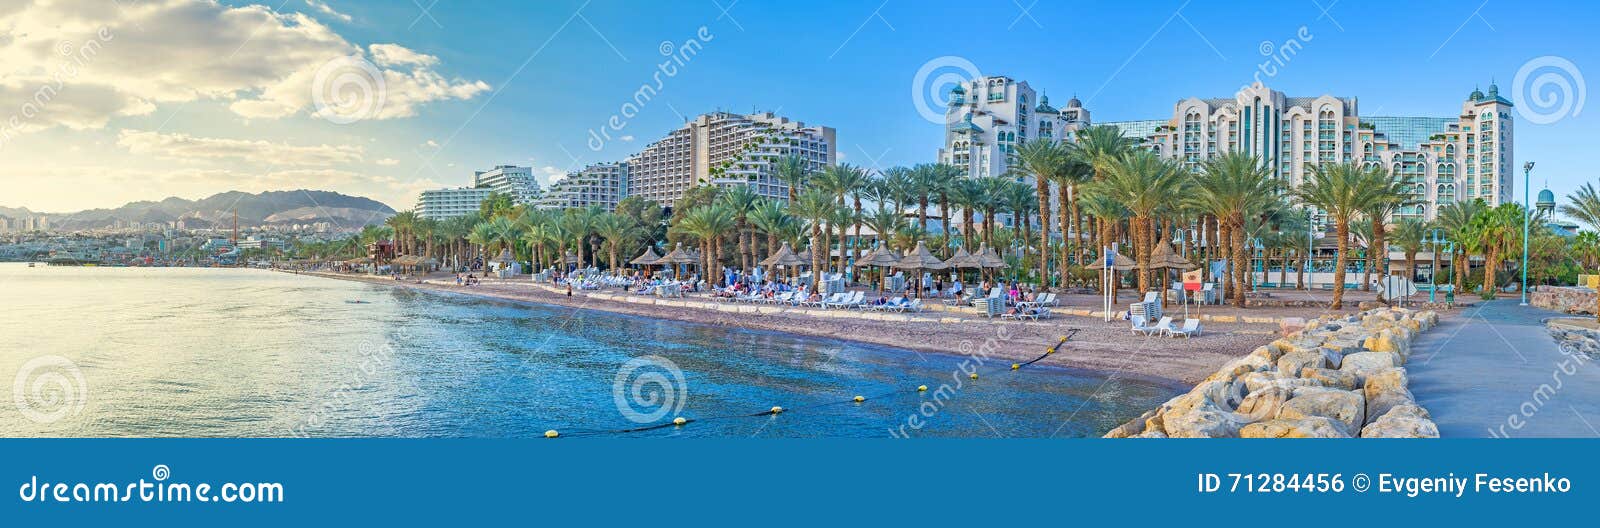 the city of eilat